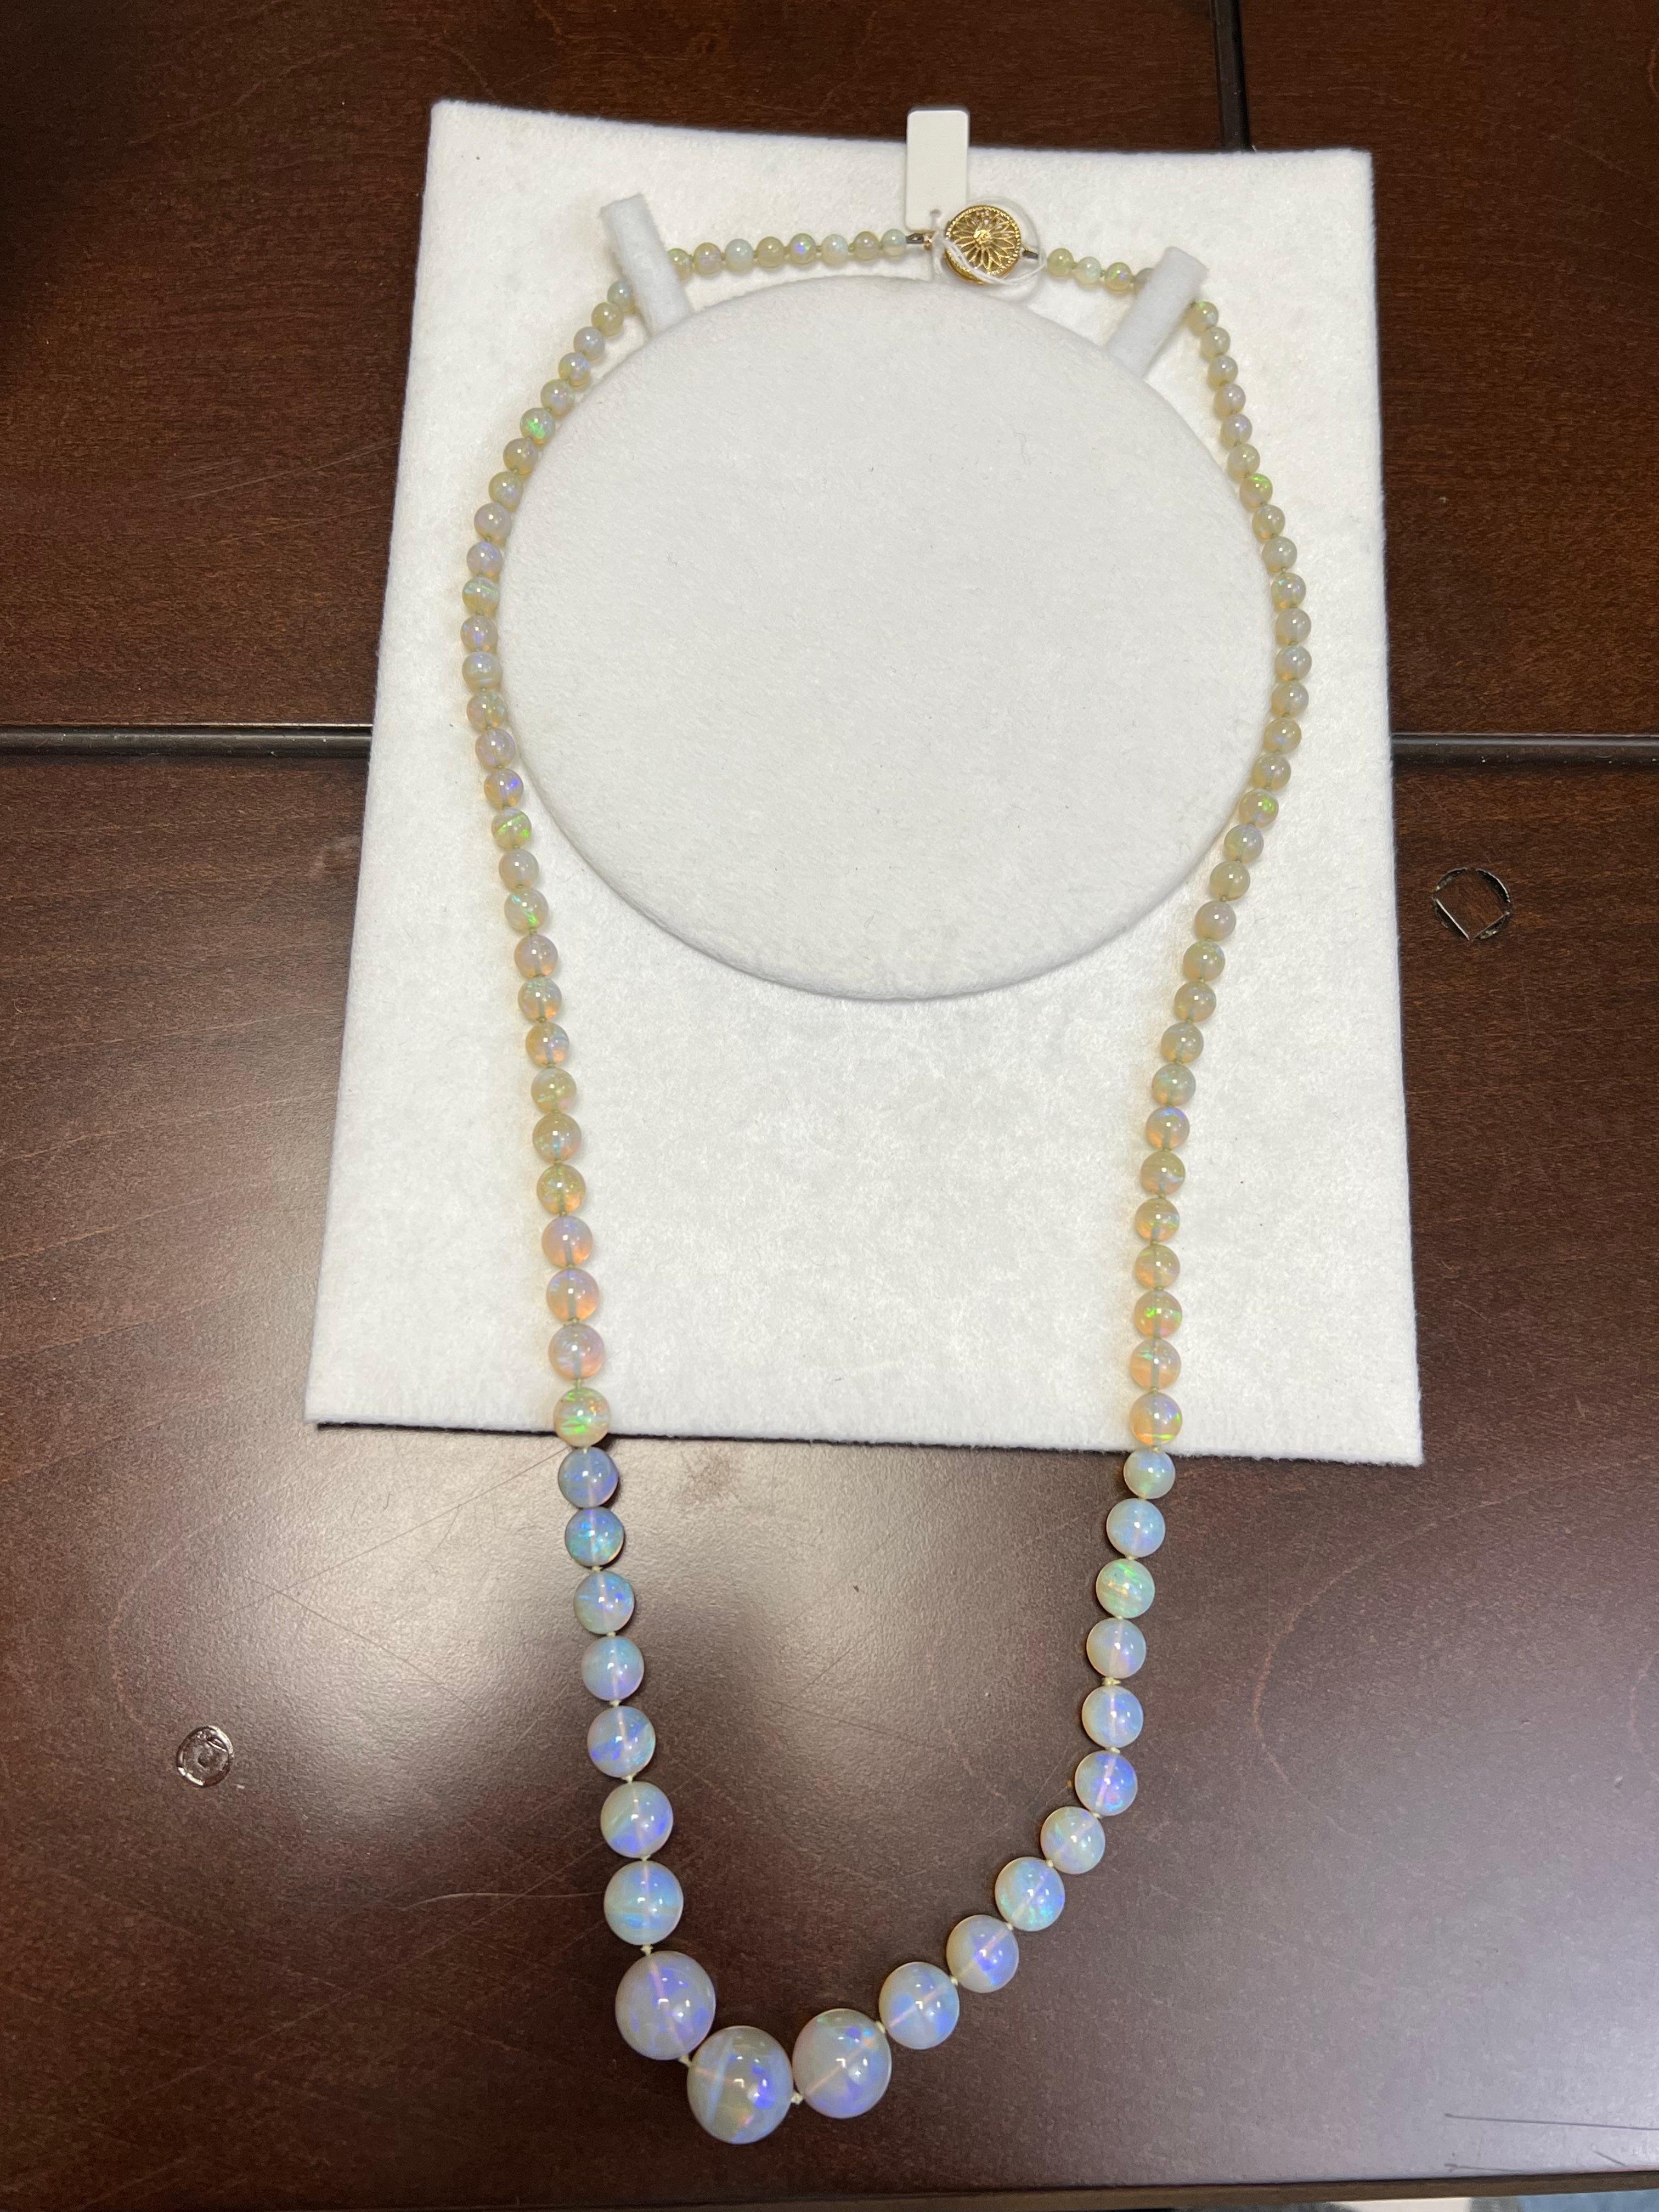 graduated gold bead necklace